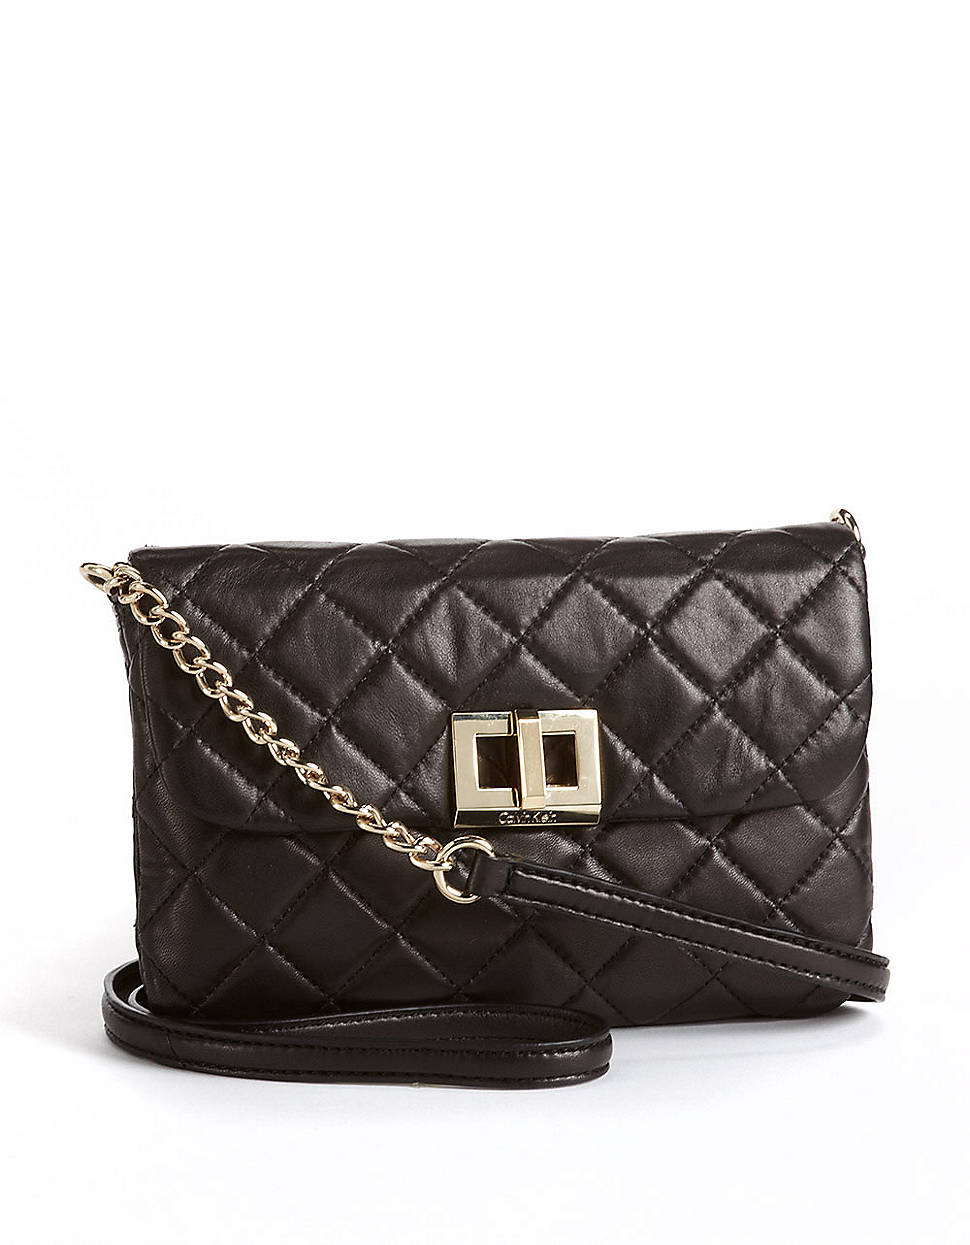 Calvin Klein Quilted Leather Crossbody Bag in Black | Lyst